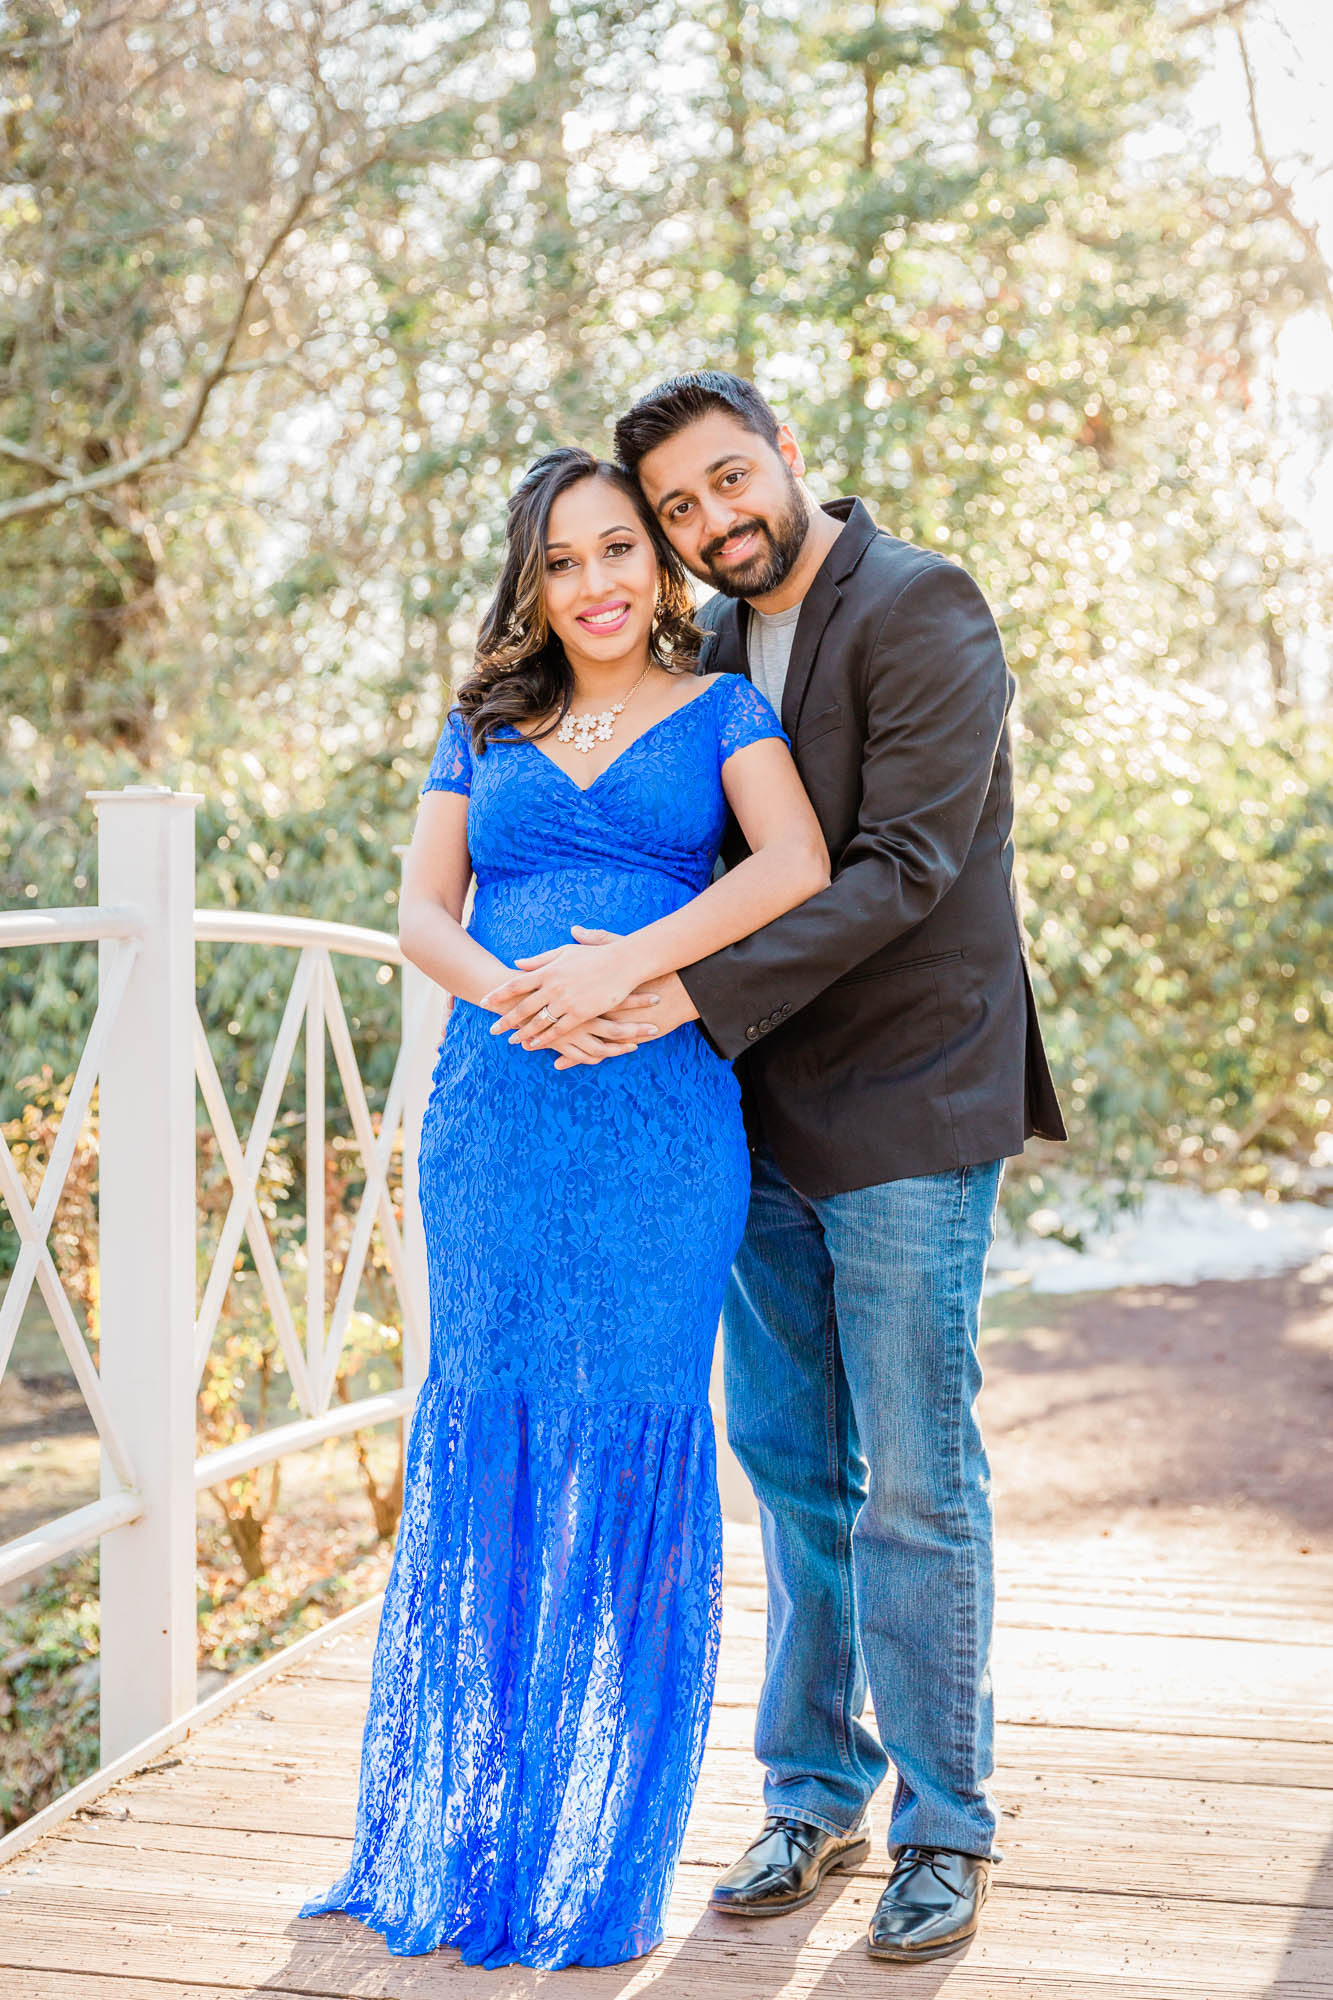 parents to be posing on bridge for maternity portrait